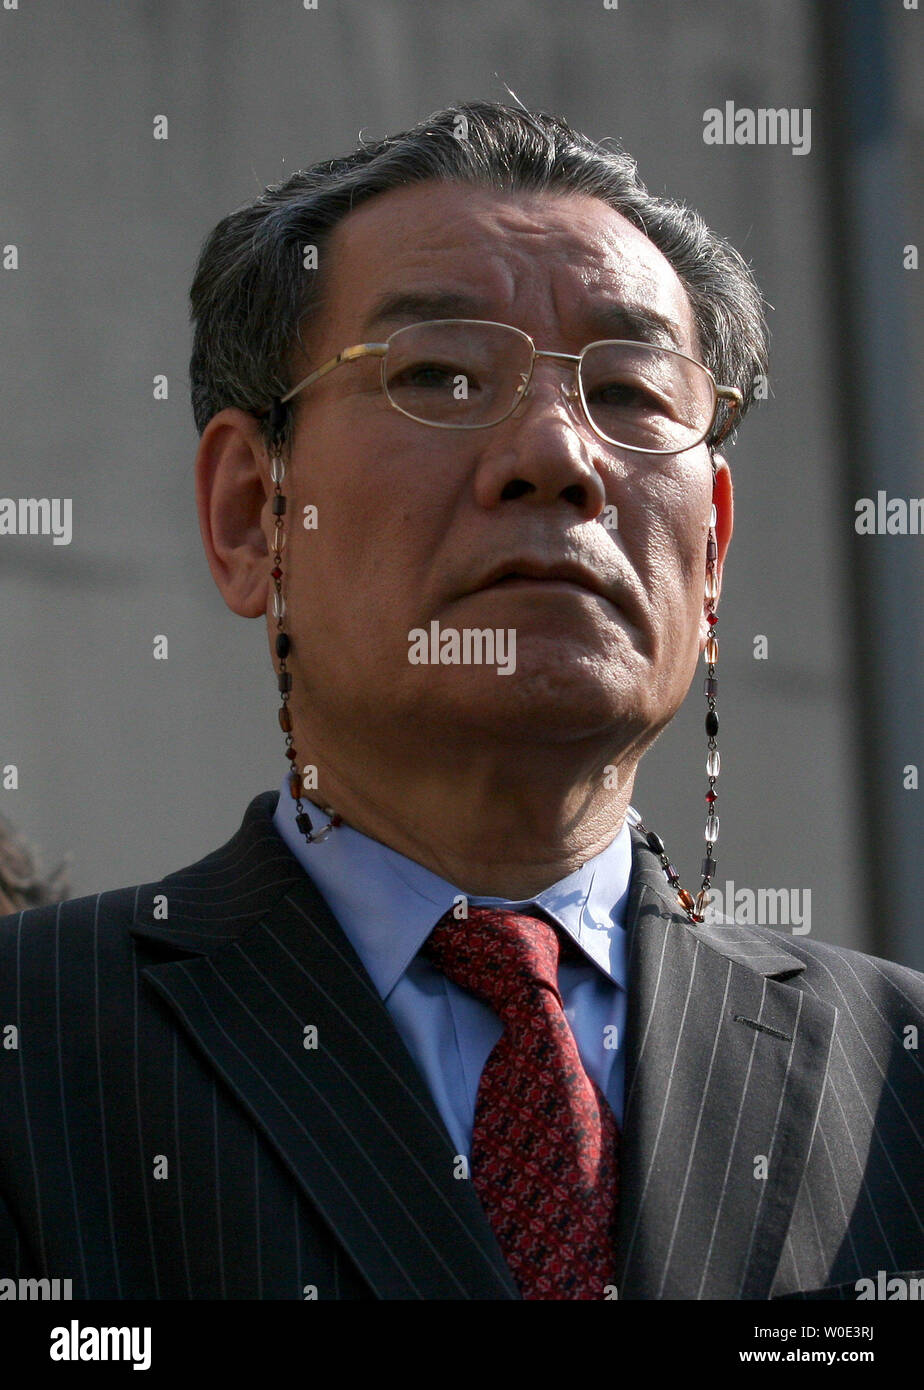 Jin Chung leaves the D.C. Superior Courthouse in Washington on June 13, 2007. Mr. Pierson, the plaintiff and D.C. judge, filed the suit after he claims, the Chung family lost his pants in their dry cleaning store. The family's attorney said that they were pleased with the way the case was going.  (UPI Photo/Dominic Bracco II) Stock Photo